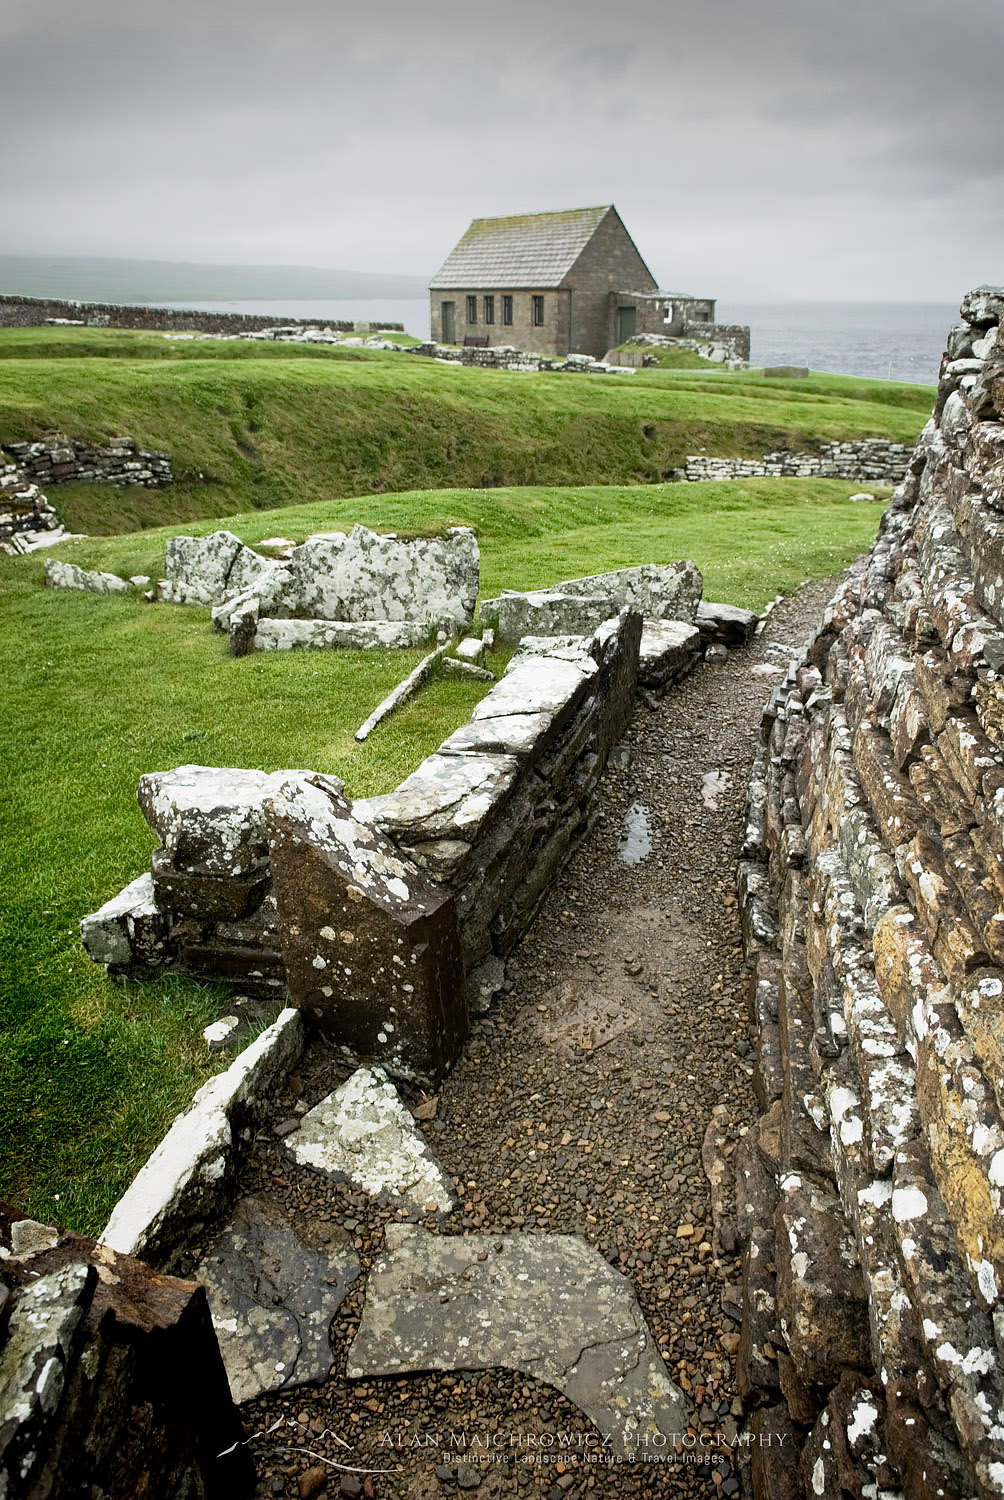 Broch of Gurness, a fortified dwelling dating back to the Iron Age around 2000 BC, Orkney Islands Scotland #12256r